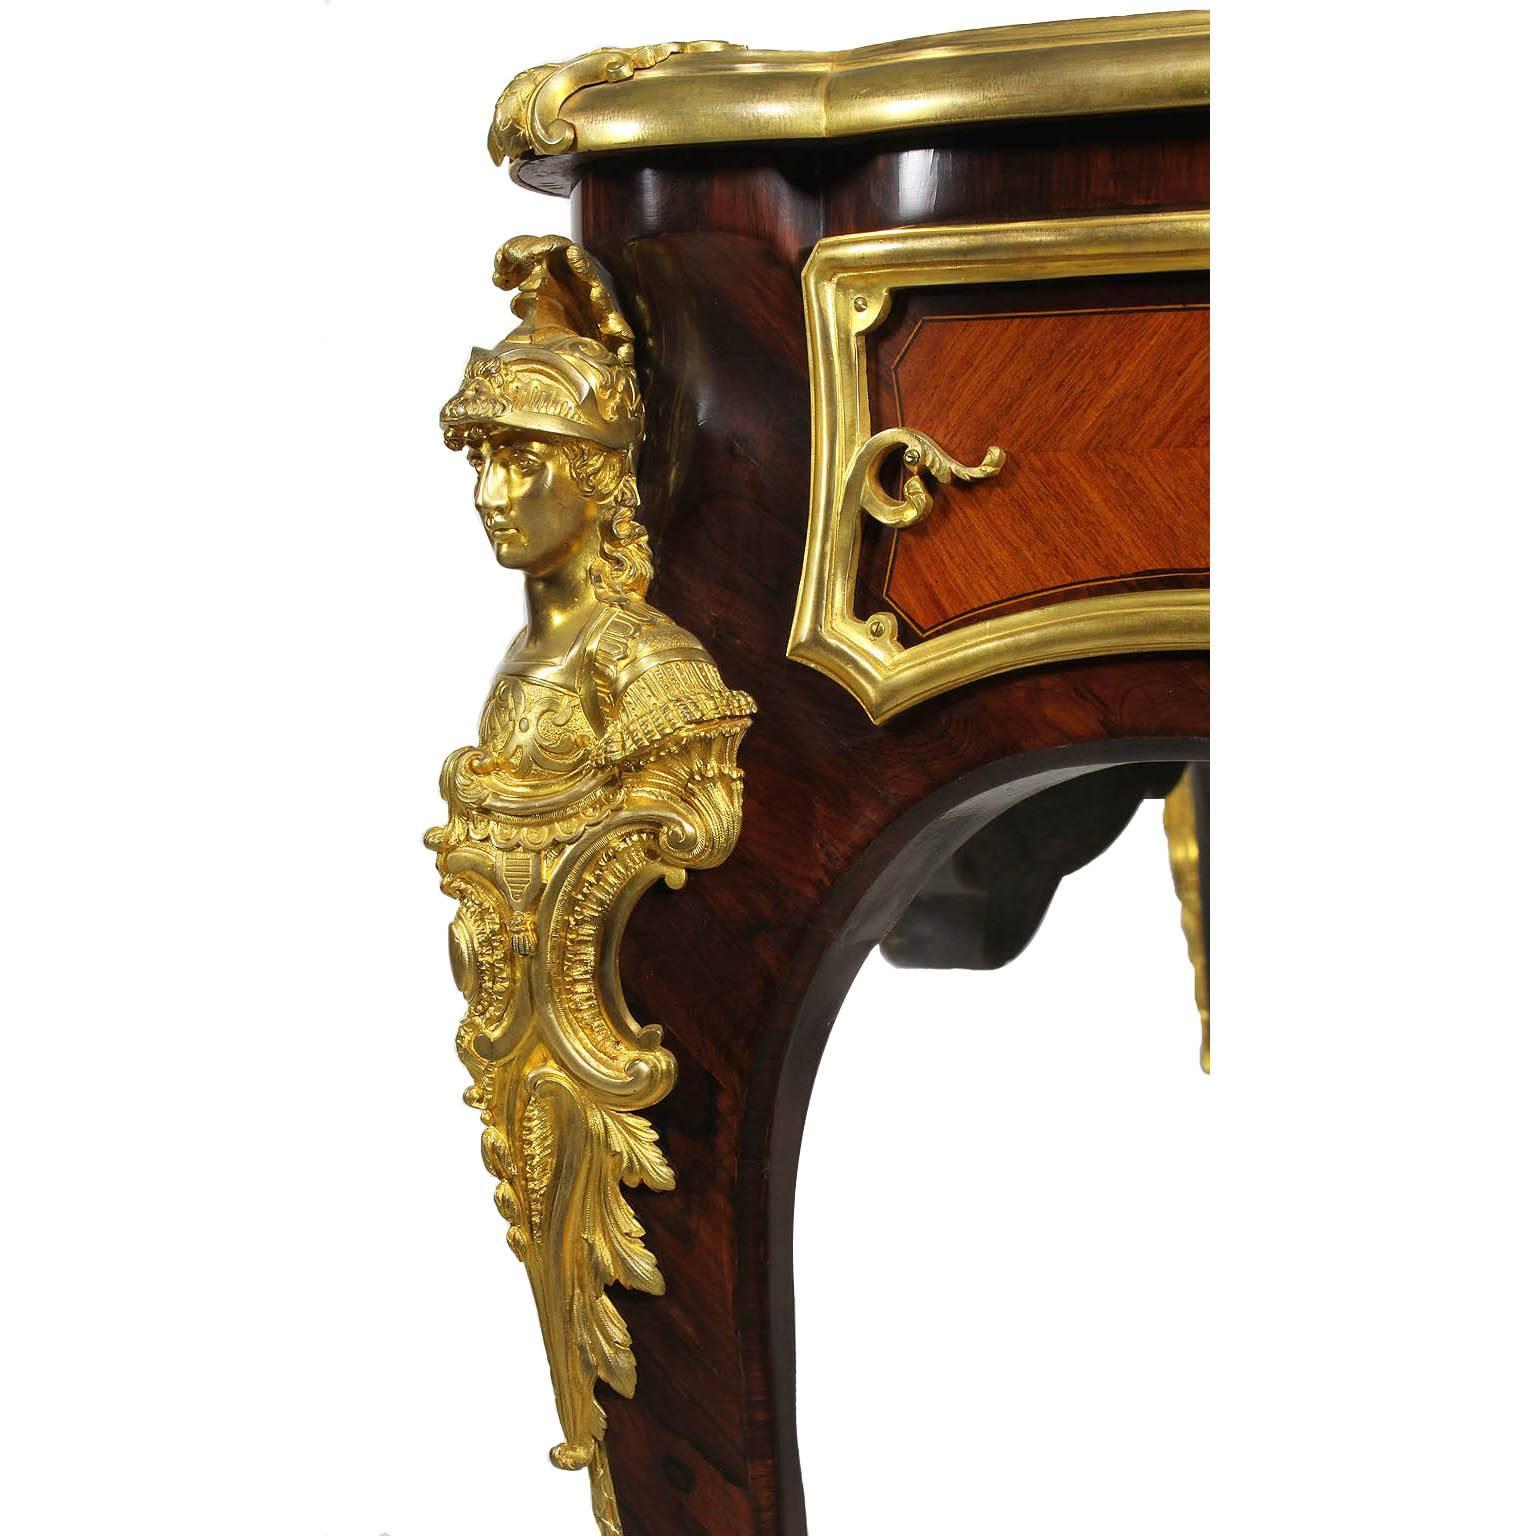 Carved French 19th Century Louis XV Style Gilt Bronze-Mounted Kingwood Bureau Plat Desk For Sale